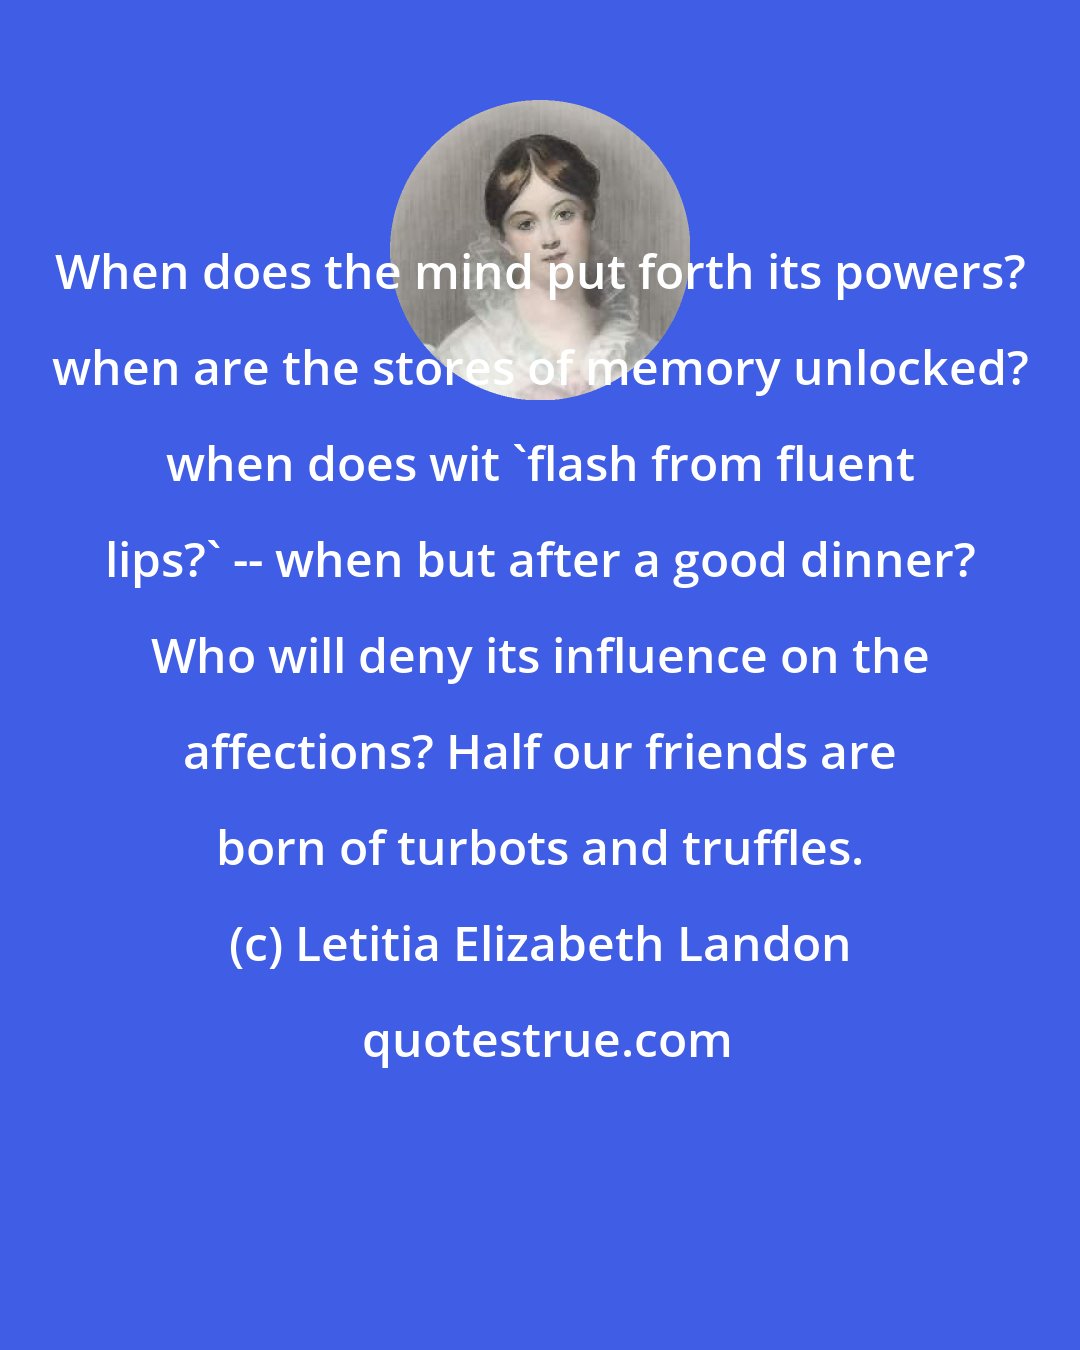 Letitia Elizabeth Landon: When does the mind put forth its powers? when are the stores of memory unlocked? when does wit 'flash from fluent lips?' -- when but after a good dinner? Who will deny its influence on the affections? Half our friends are born of turbots and truffles.